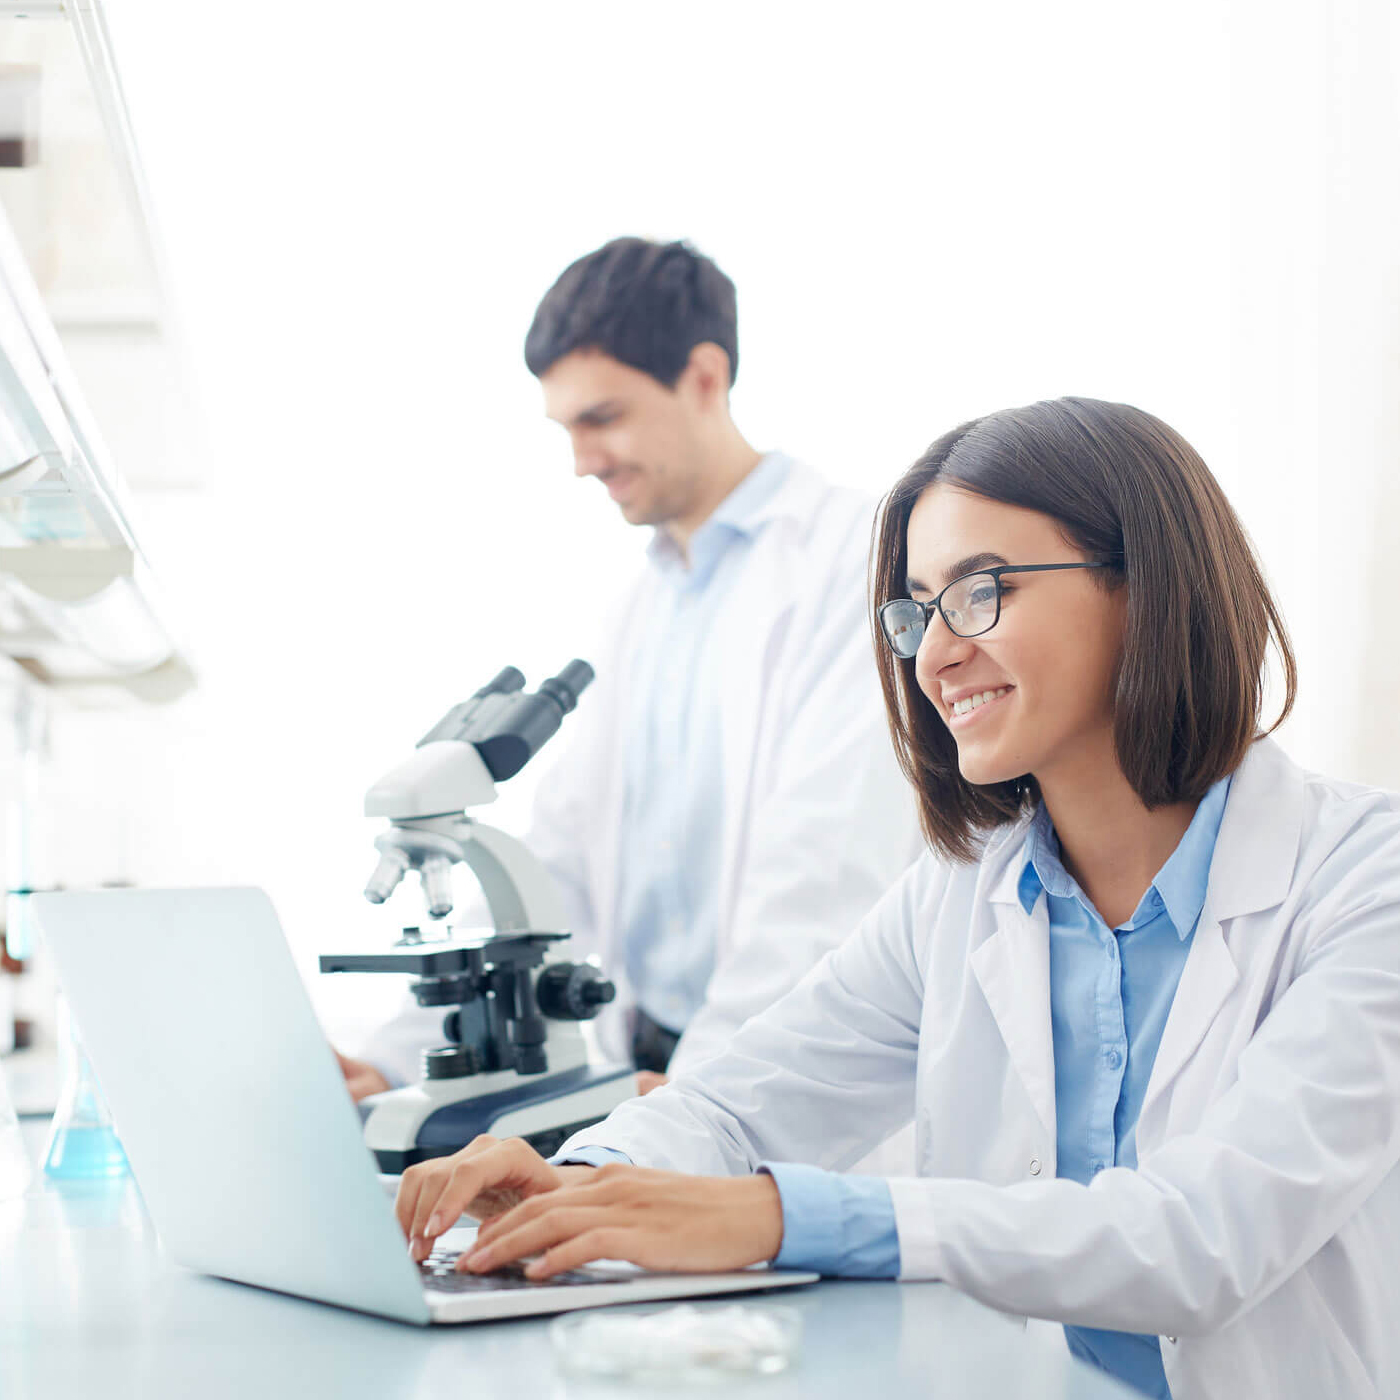 A woman and a man in lab coats collaborating on a laptop.